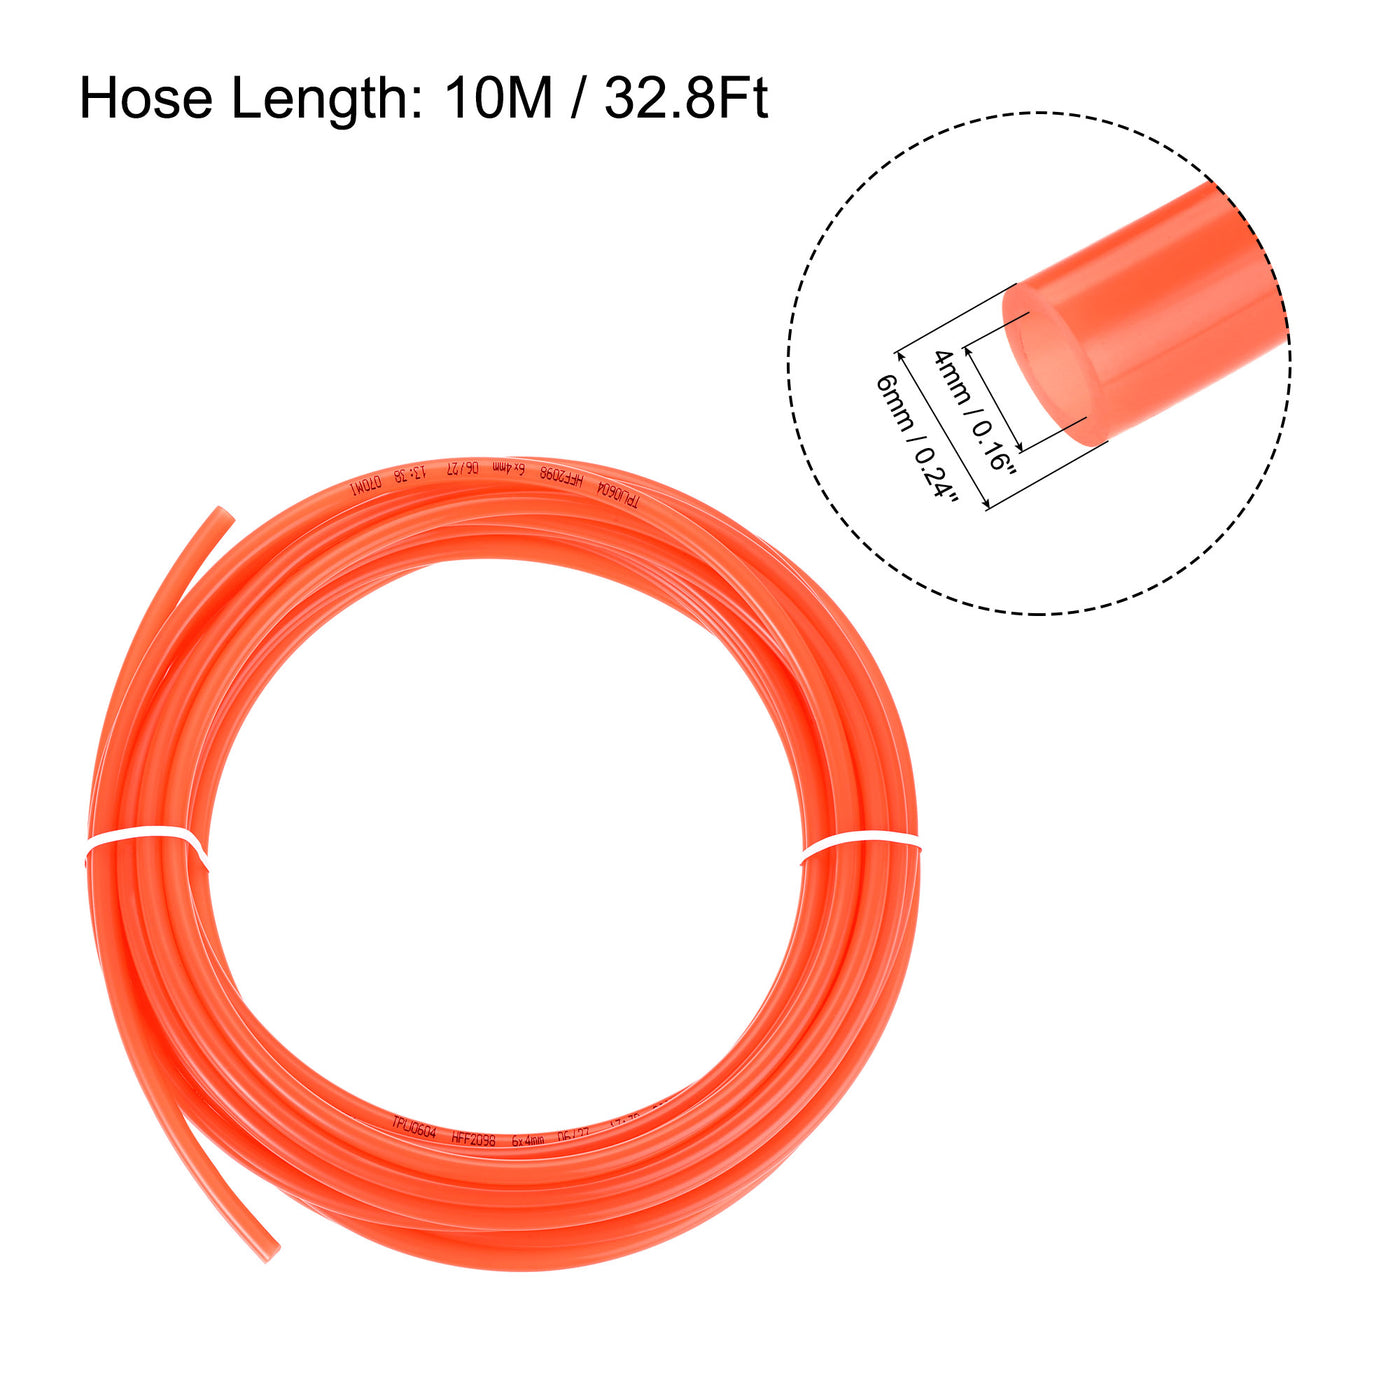 Uxcell Uxcell Pneumatic 6mm OD Polyurethane PU Air Hose Tubing Kit 10 Meters Orange with 14 Pcs Push to Connect Fittings